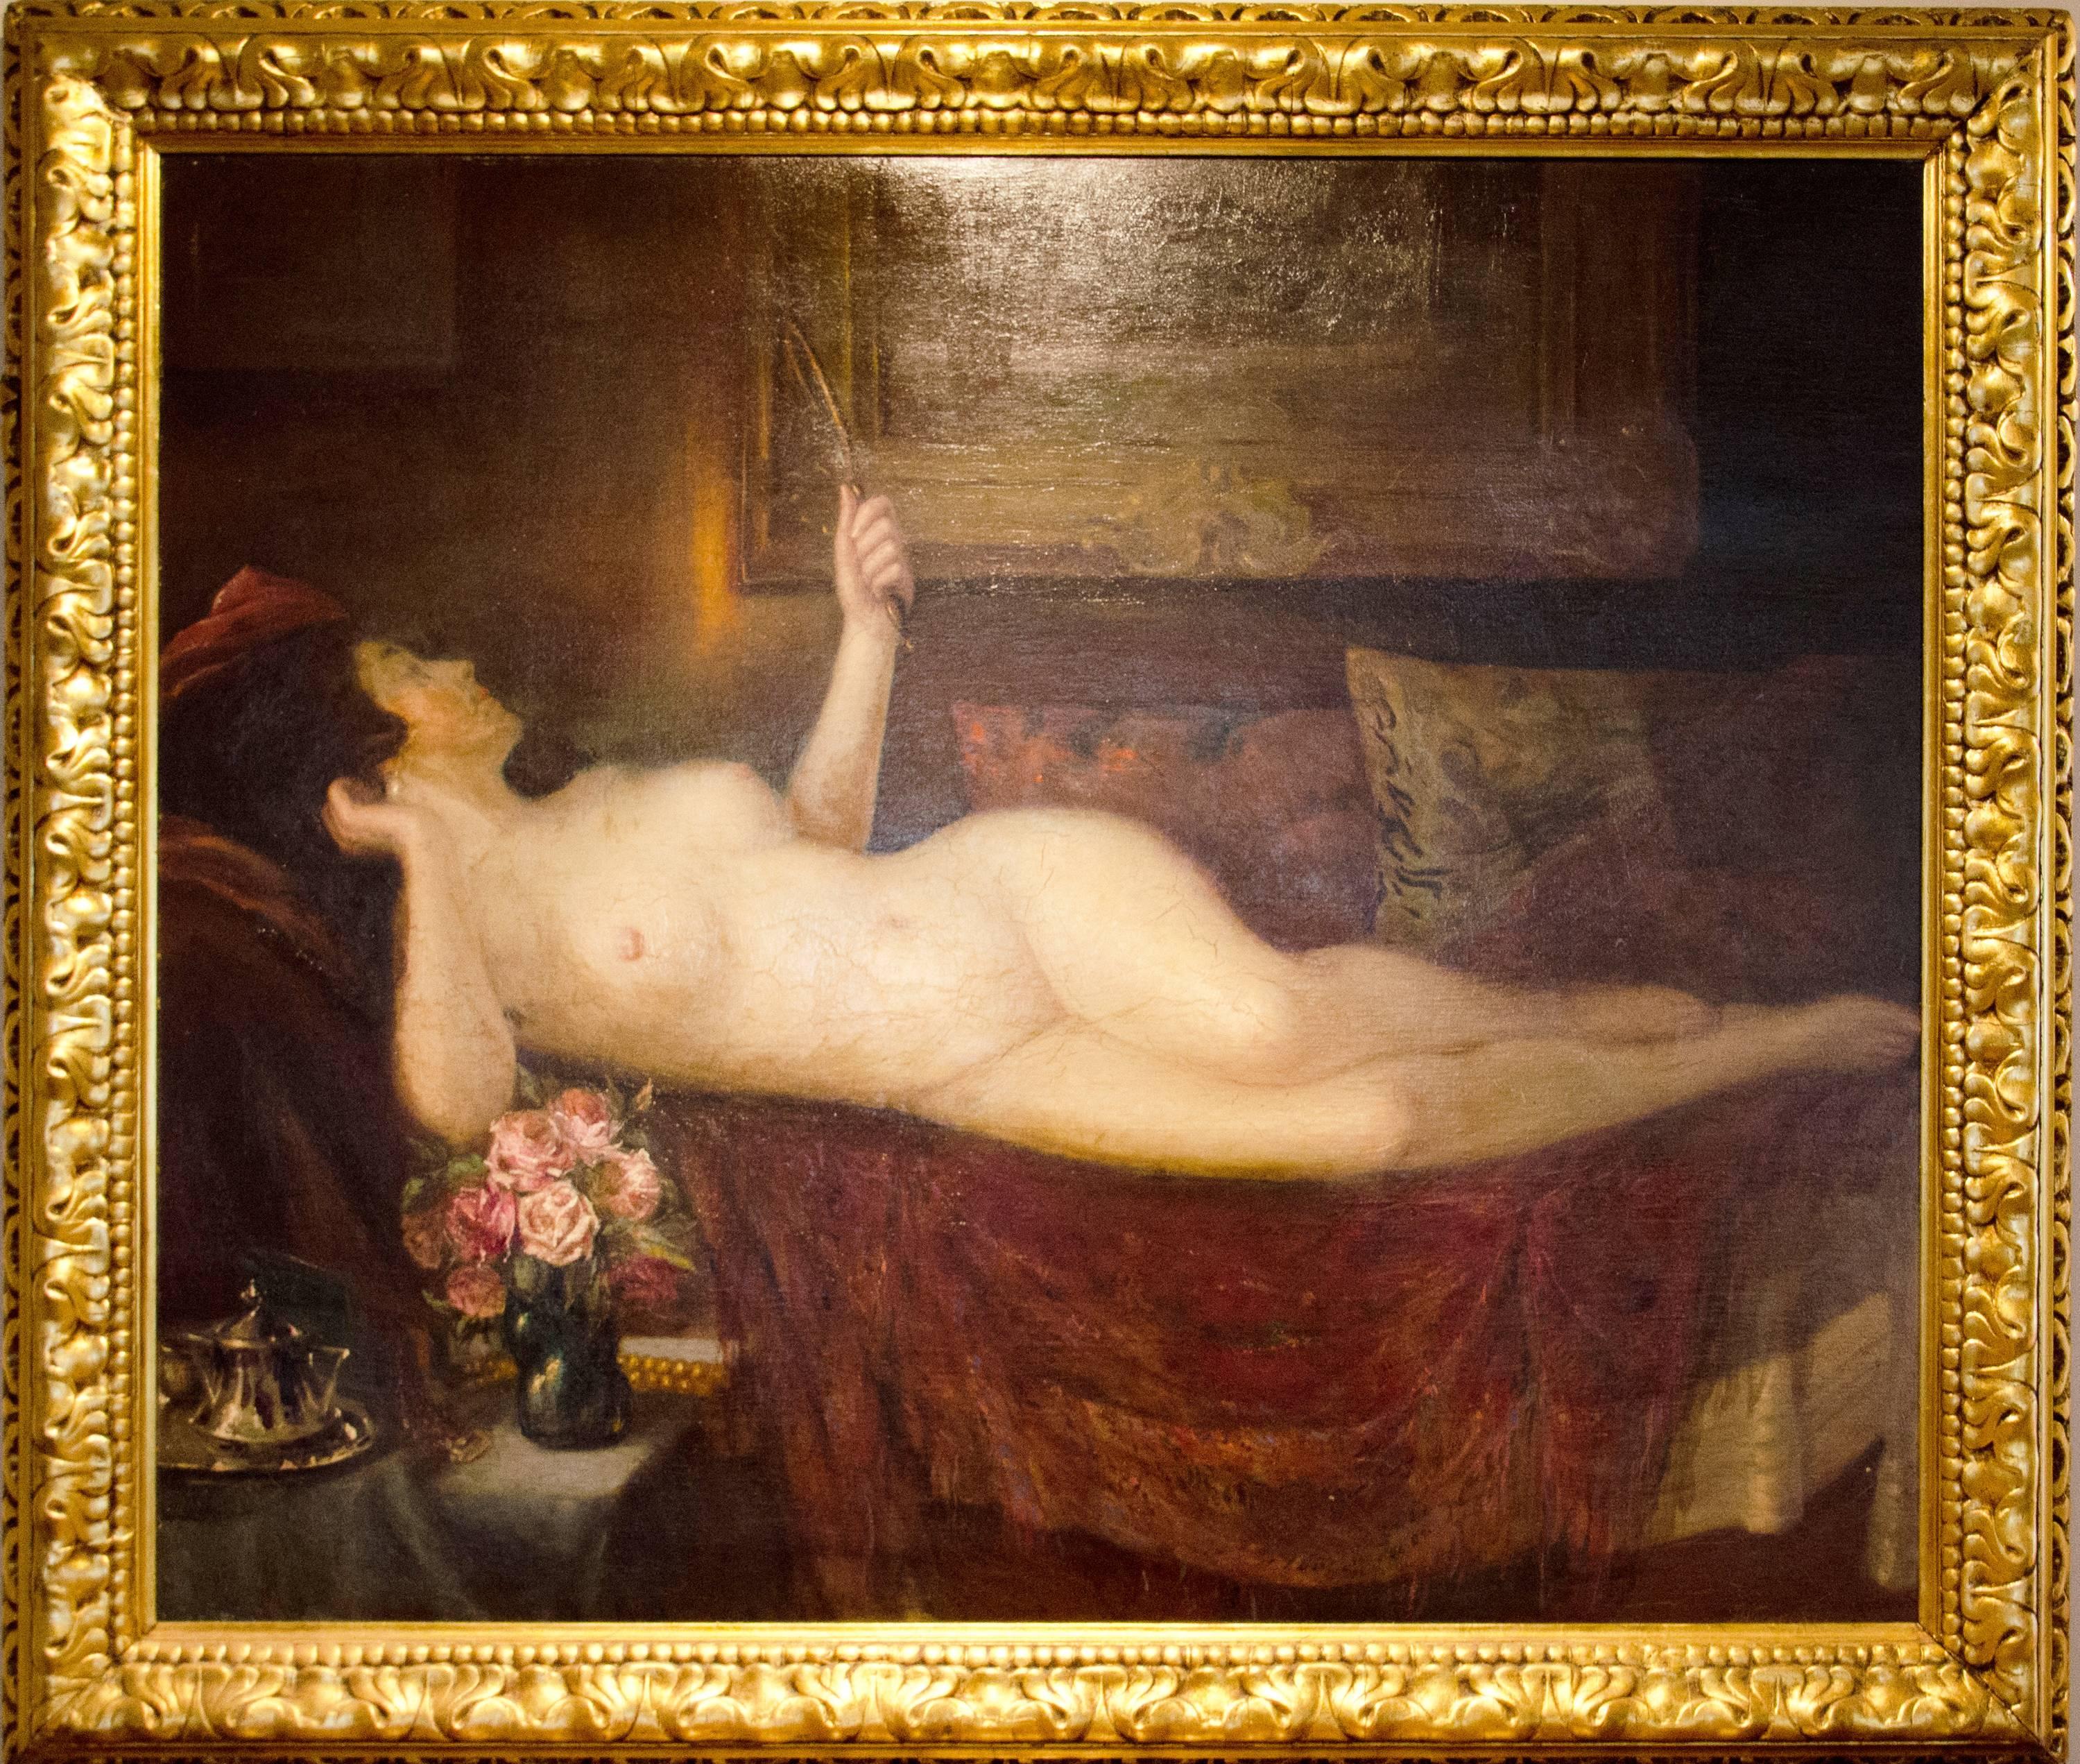 JAN WYSOCKI (Polish 1873-1960)
Reclining Nude Woman with Mirror and Roses
Oil on canvas
39 x 48 inches
Signed lower right
In a period gold leaf frame

Jan Wysocki was born on February 7, 1873 in Mysłowice in Upper Silesia. In 1893 he went to Munich,